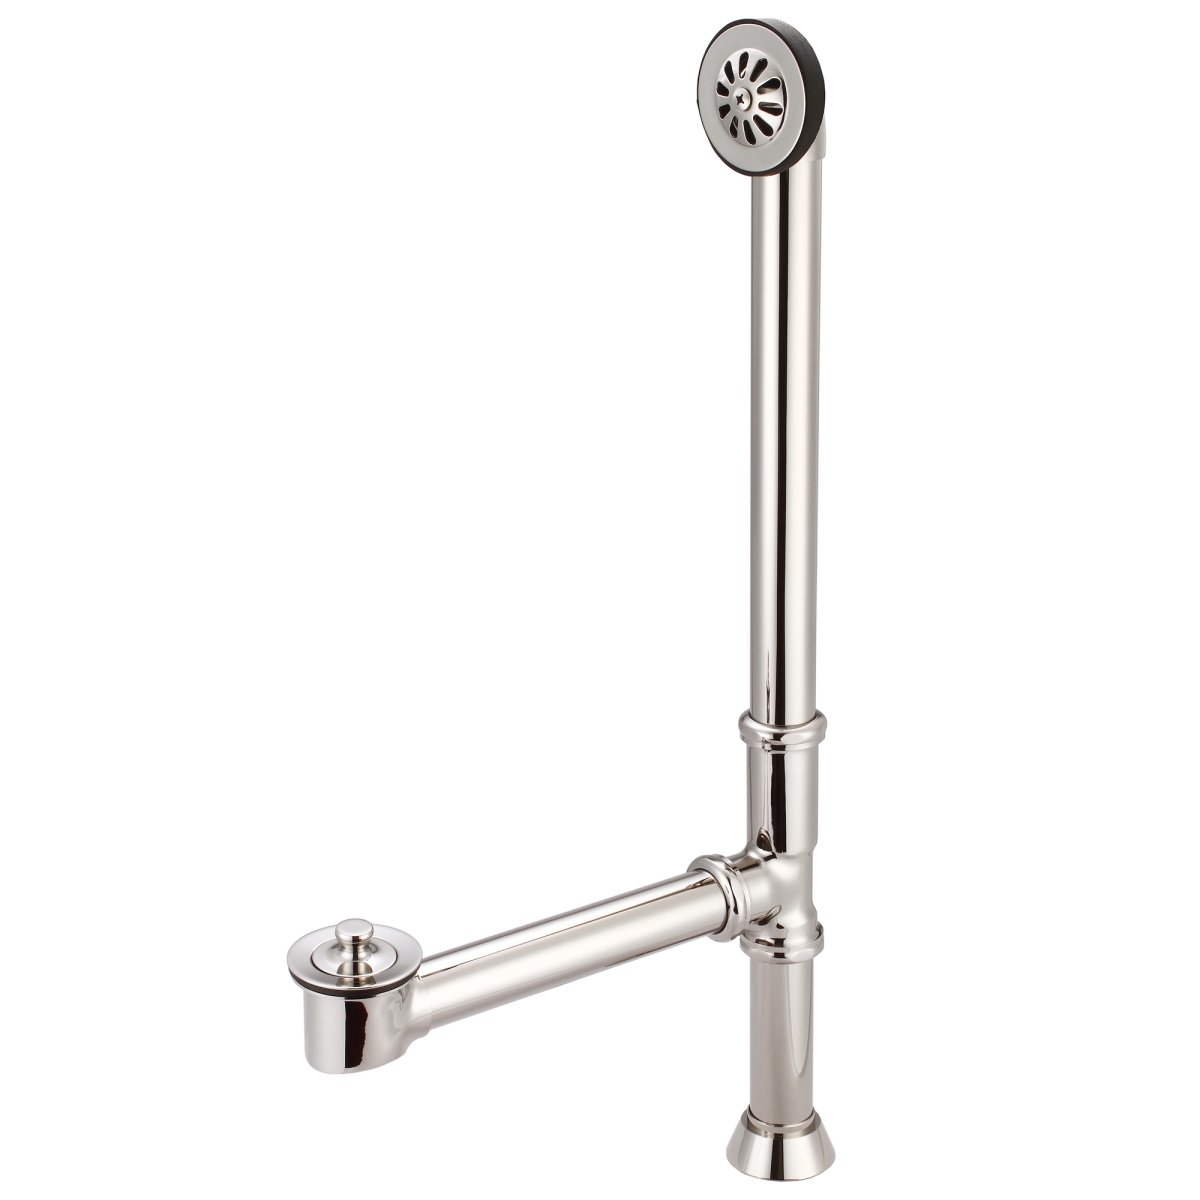 Wo-0001-05 Lift & Turn Exposed Finish Tub Drain For Claw Foot Or Other Elegant Tubs - Ivory & Polished Nickel